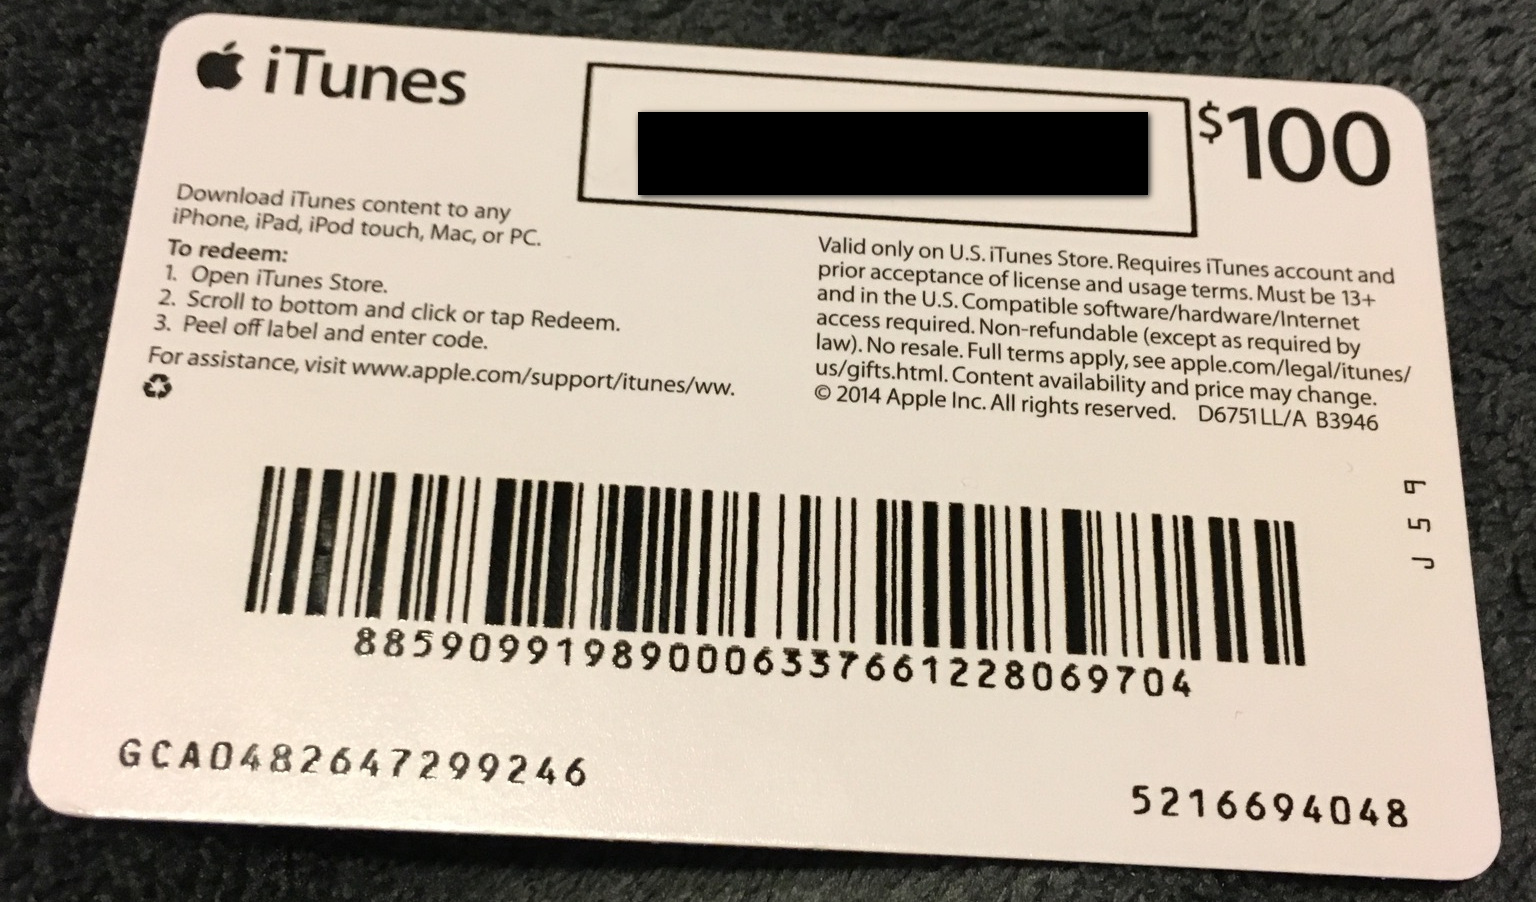 Buy iTunes Gift Card $100 USA Card Photo and download